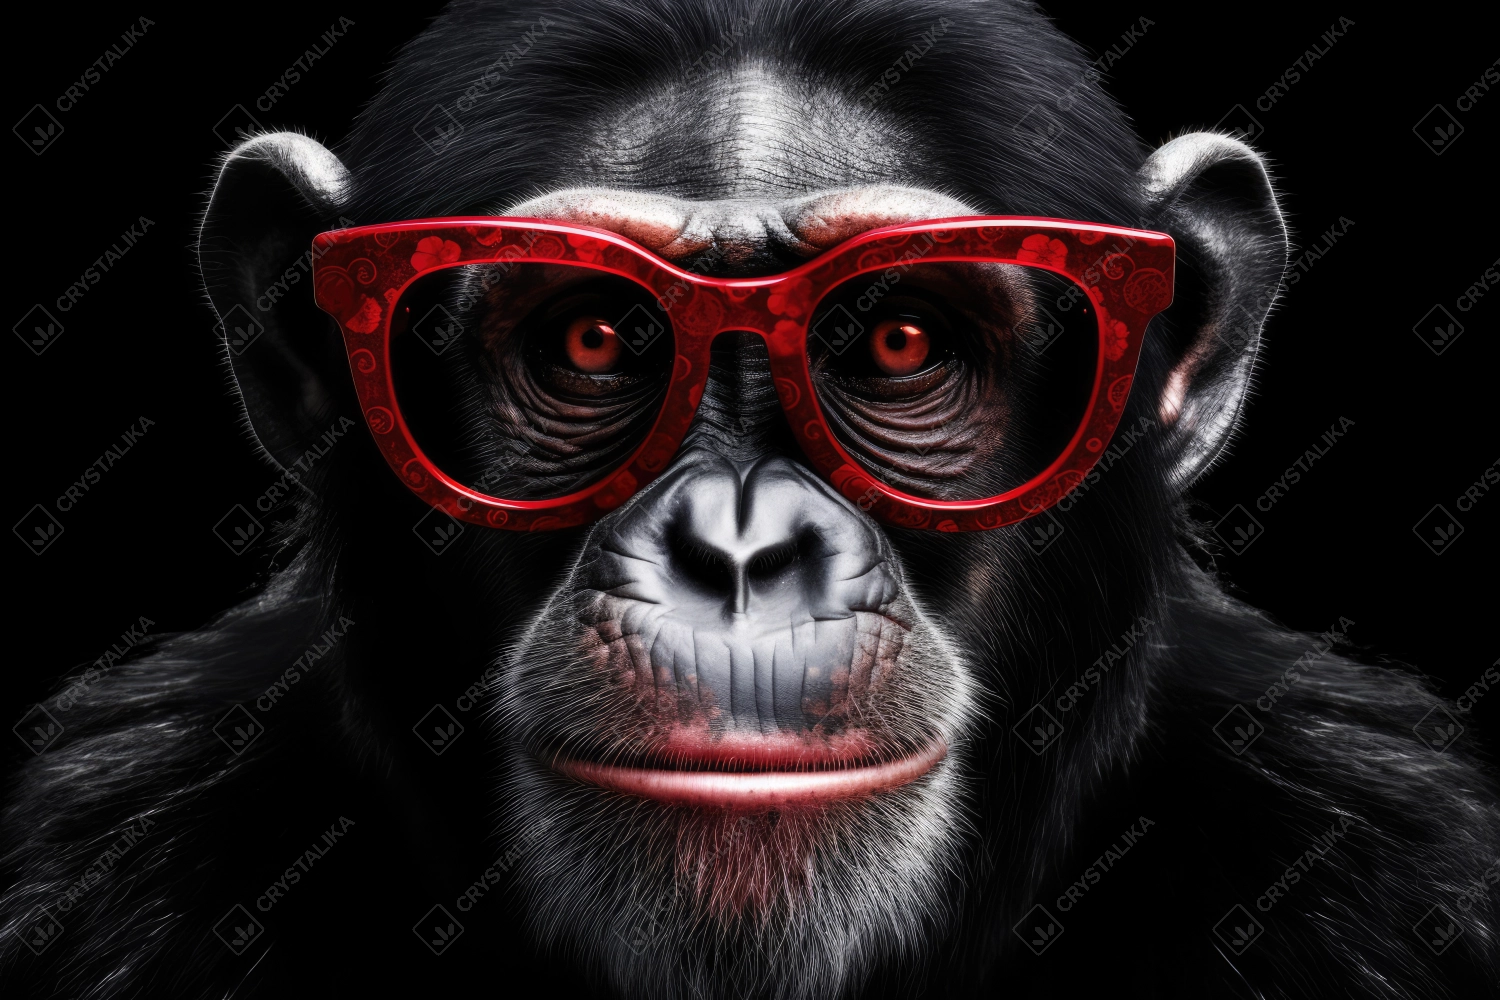 Chimpanzee portrait with red glasses